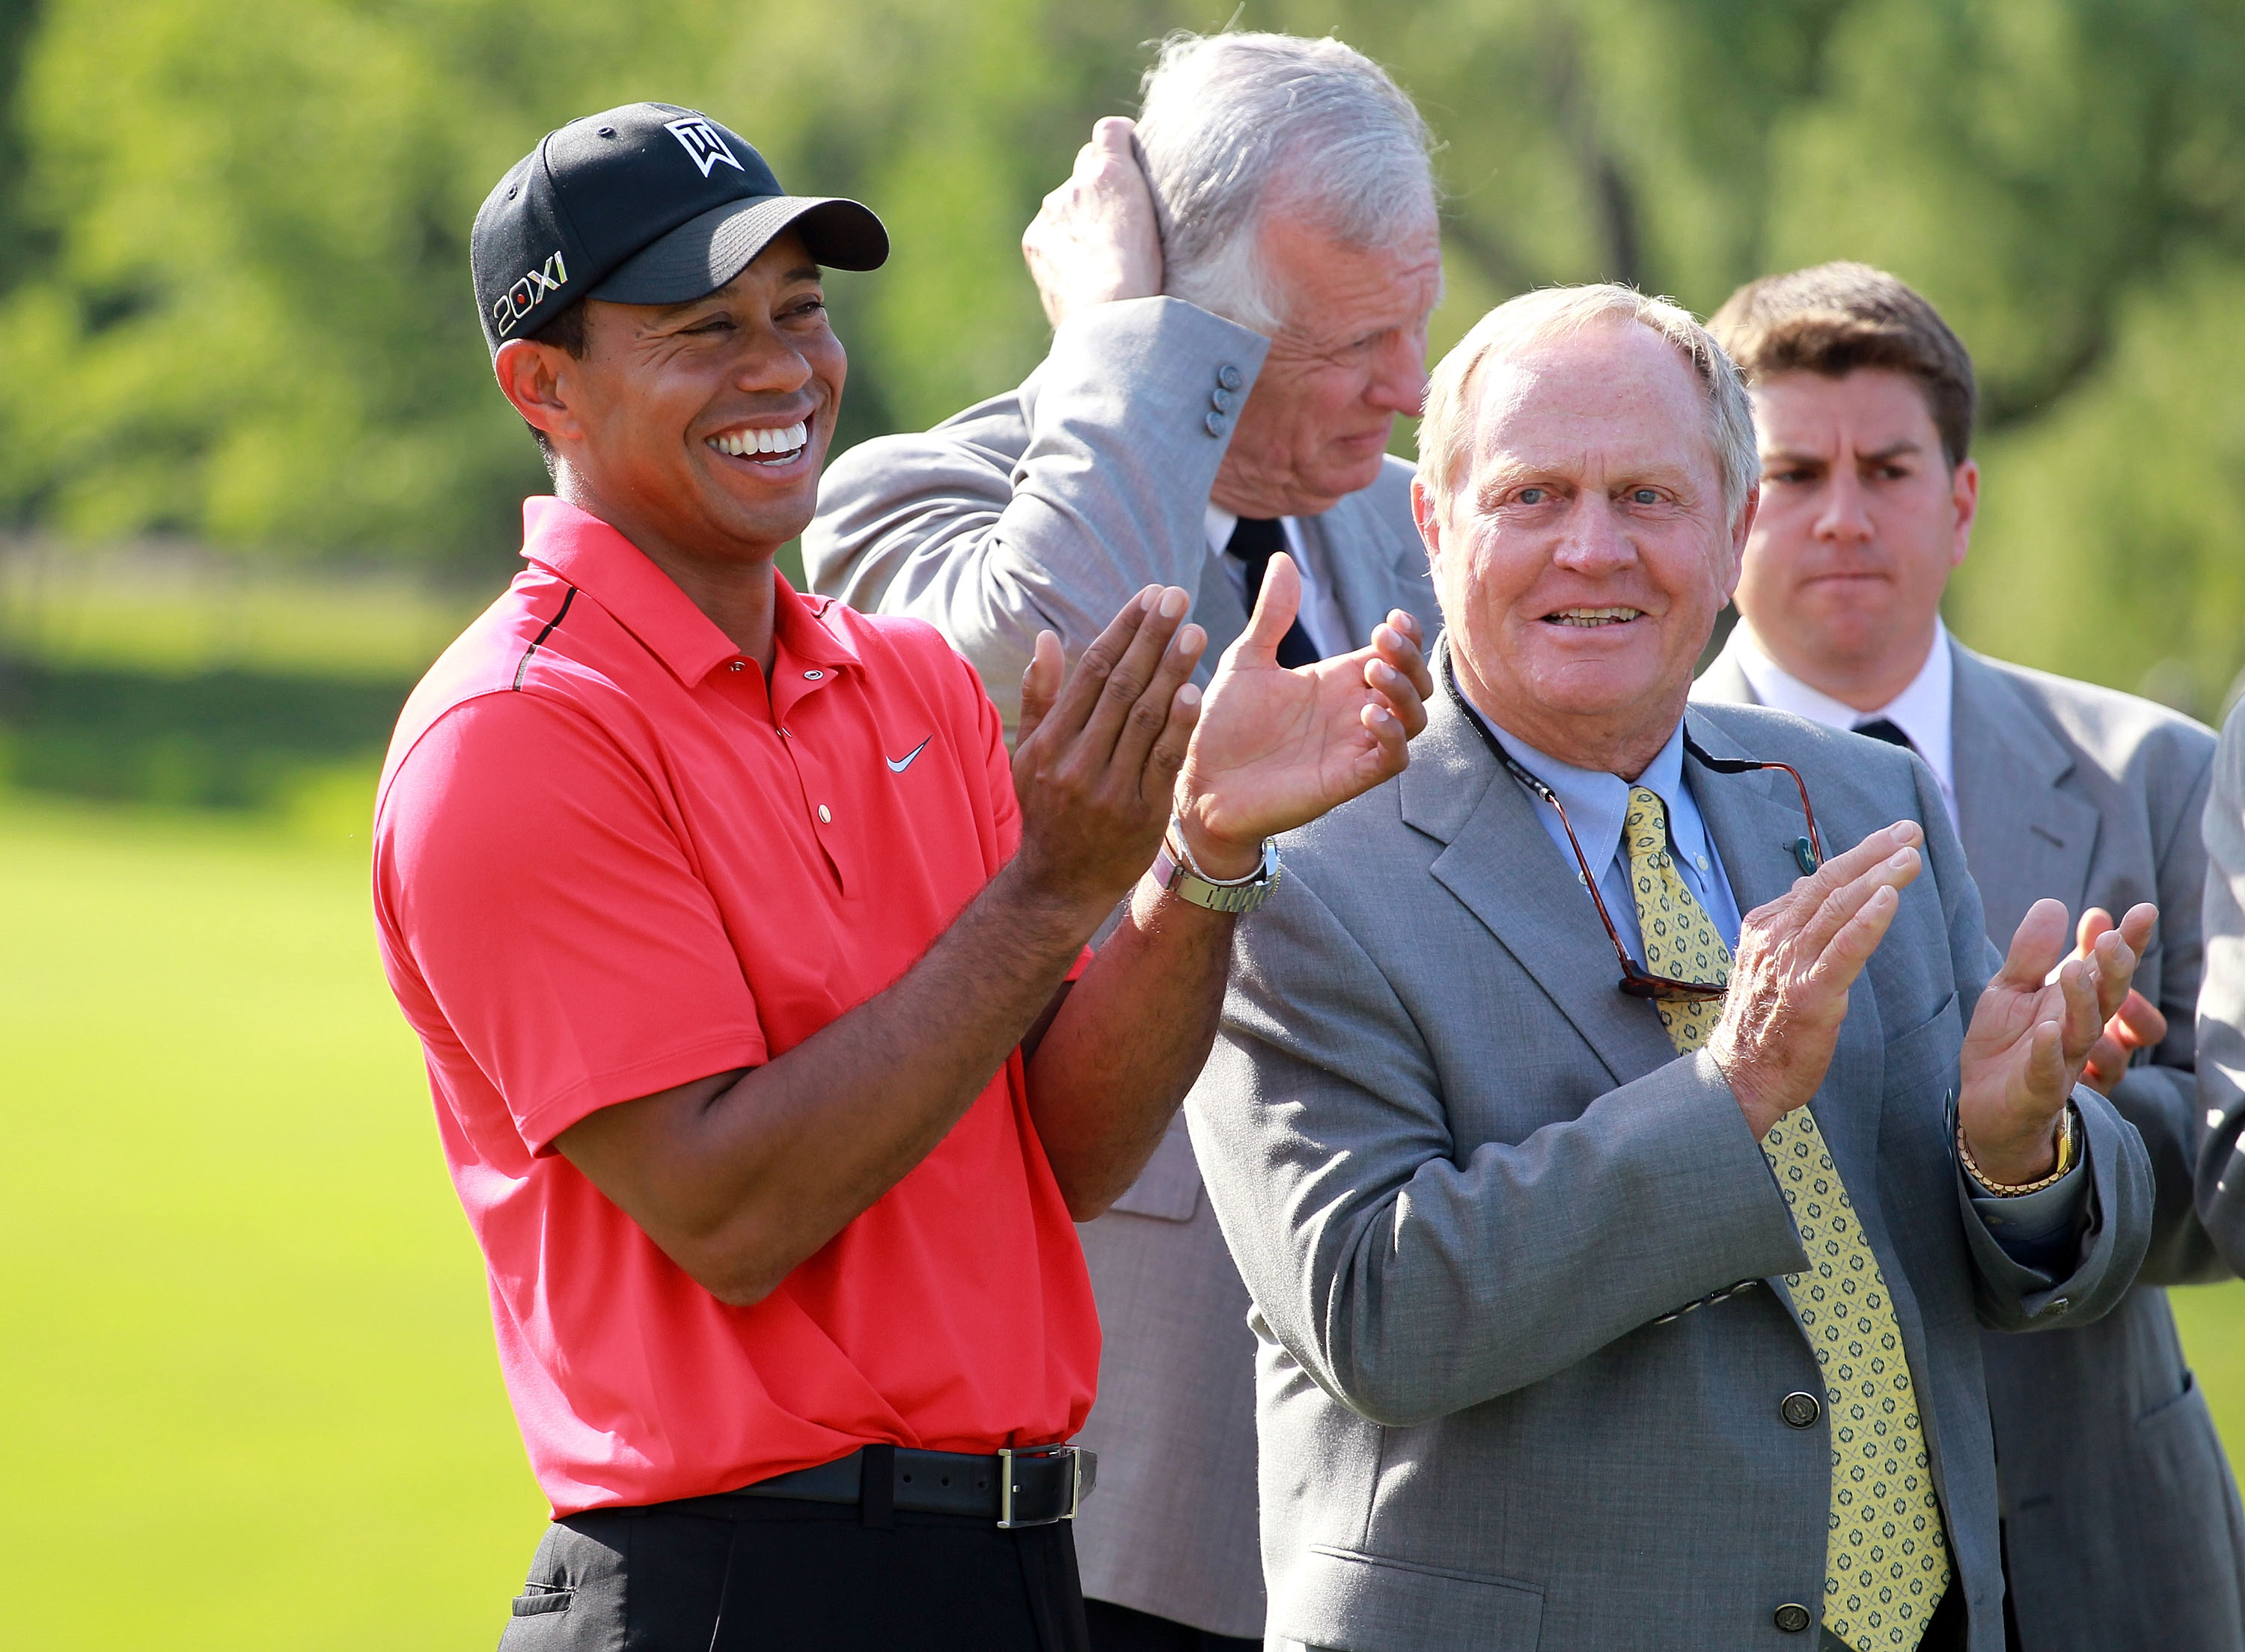 Tiger Woods Returns to the Course Where He Hit the Best Shot Jack Nicklaus Has Ever Seen